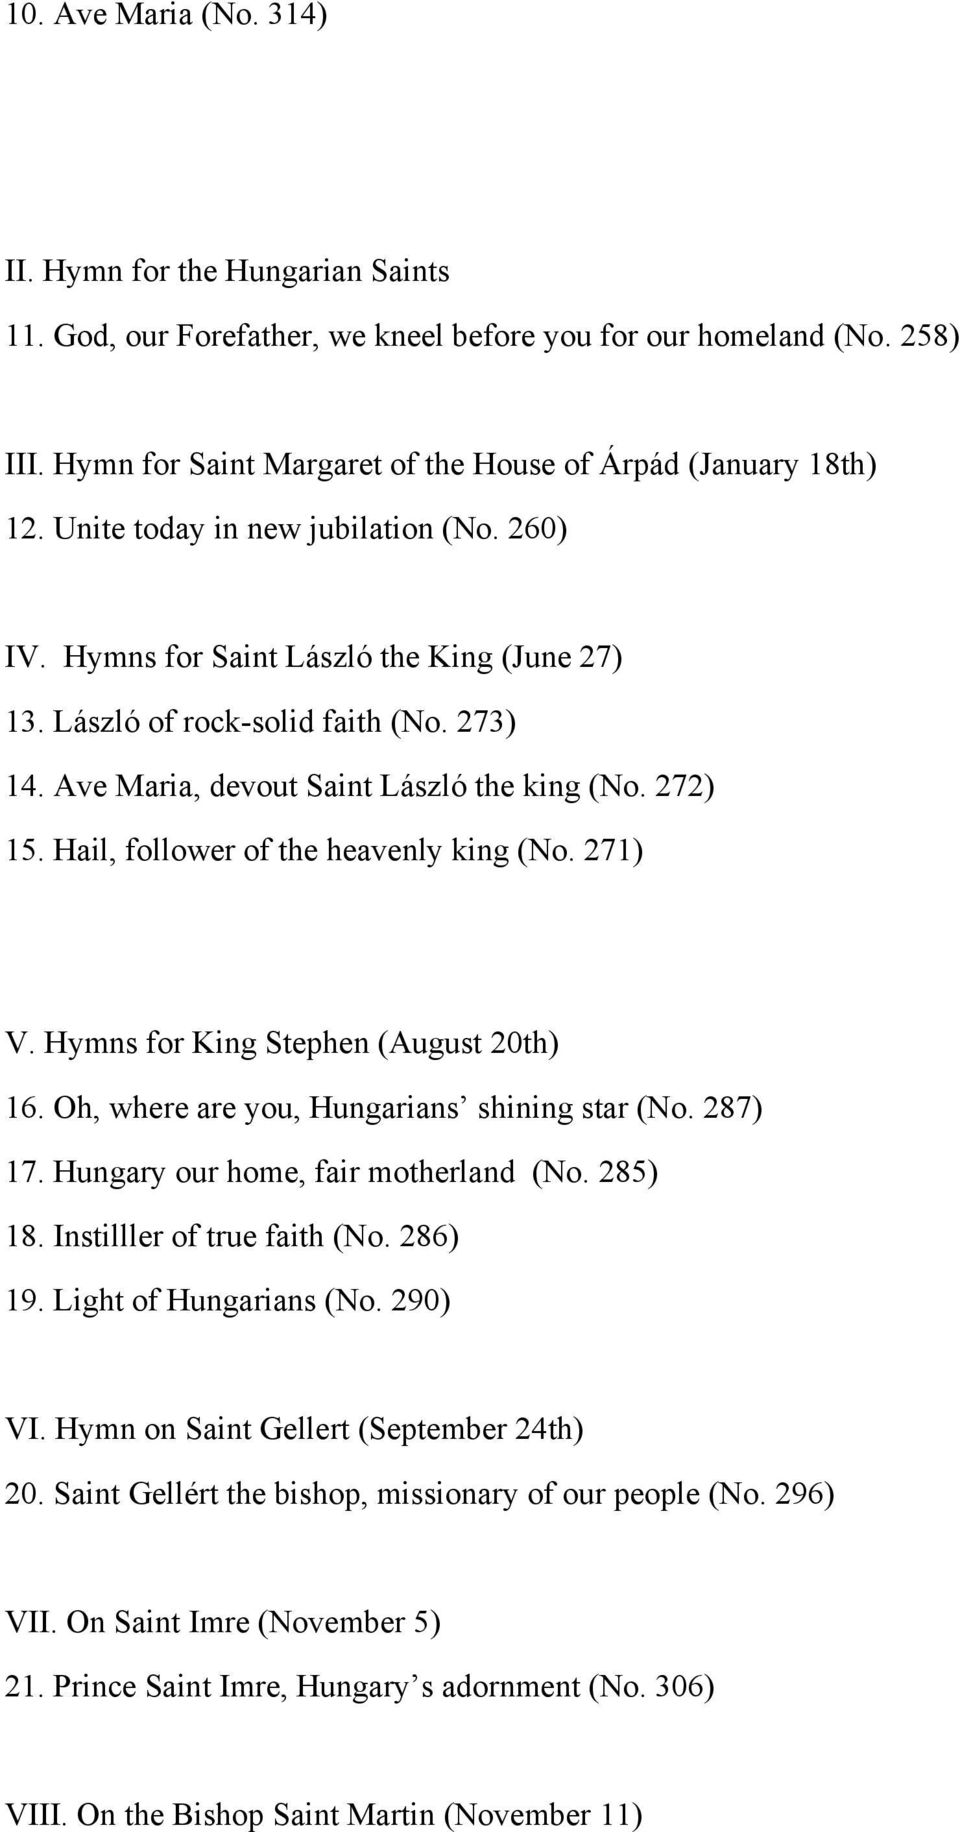 Hail, follower of the heavenly king (No. 271) V. Hymns for King Stephen (August 20th) 16. Oh, where are you, Hungarians shining star (No. 287) 17. Hungary our home, fair motherland (No. 285) 18.